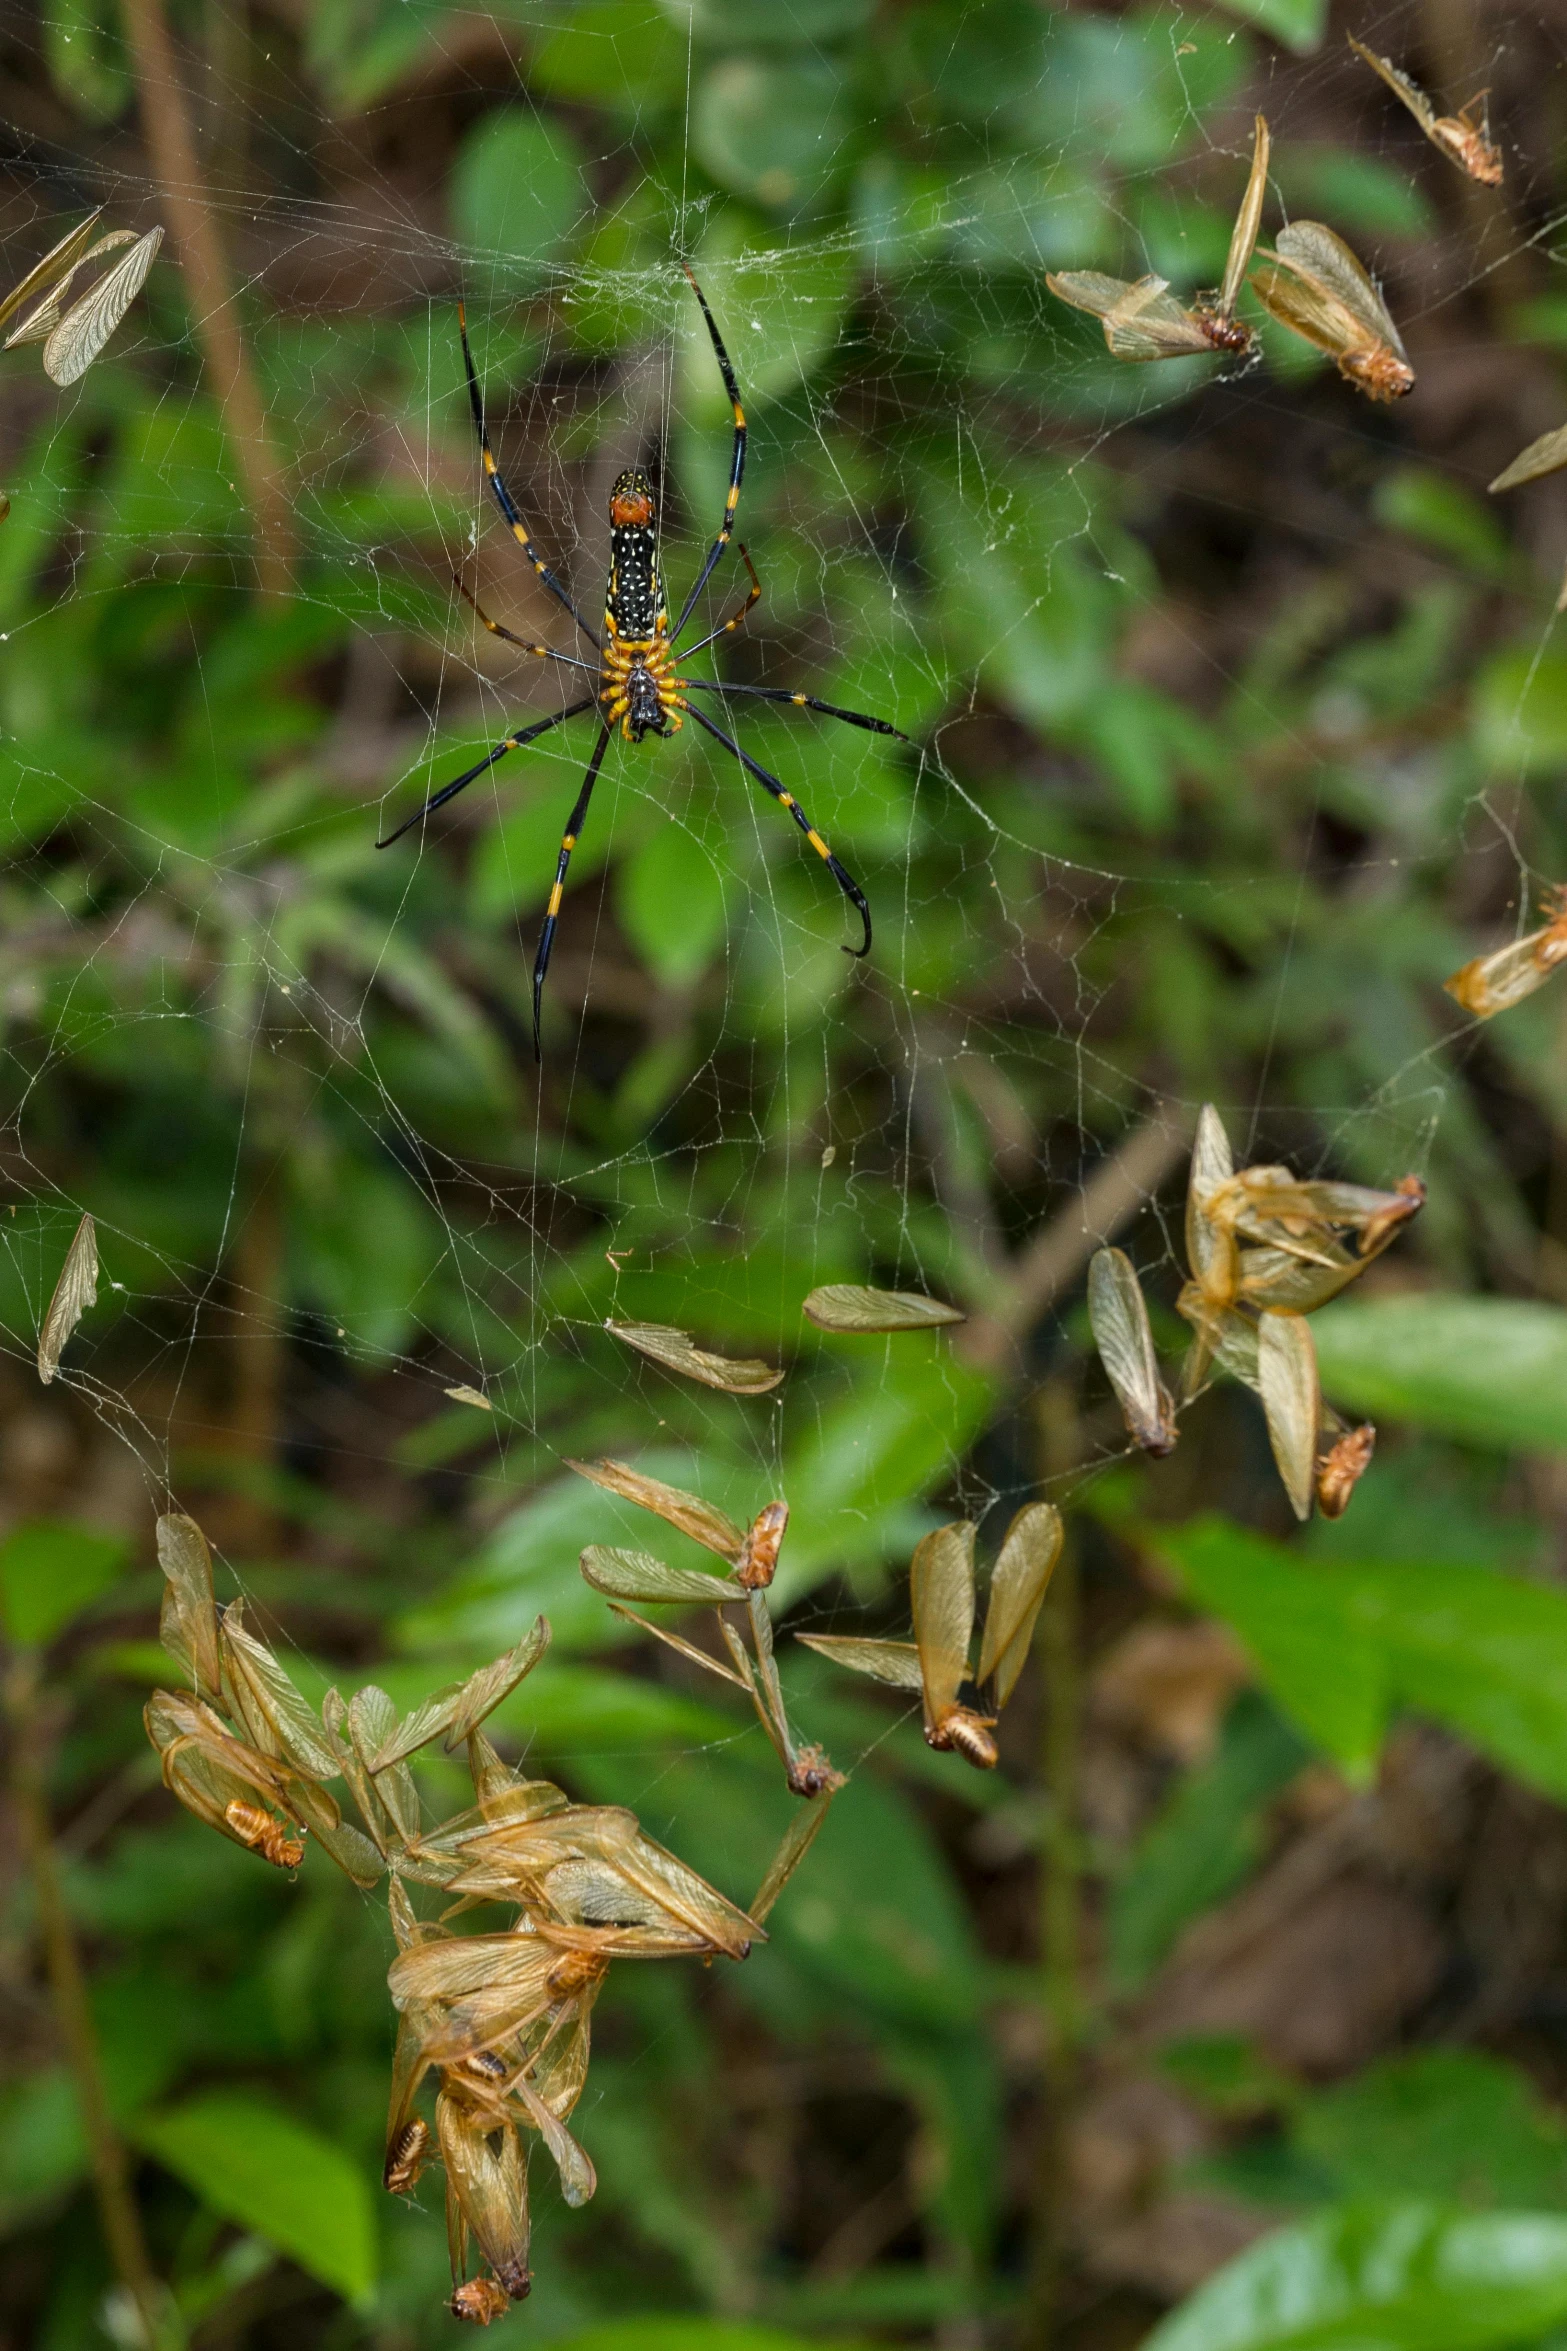 a close up of a spider on a web, hurufiyya, 8 intricate golden tenticles, in a jungle environment, a tall, cotton